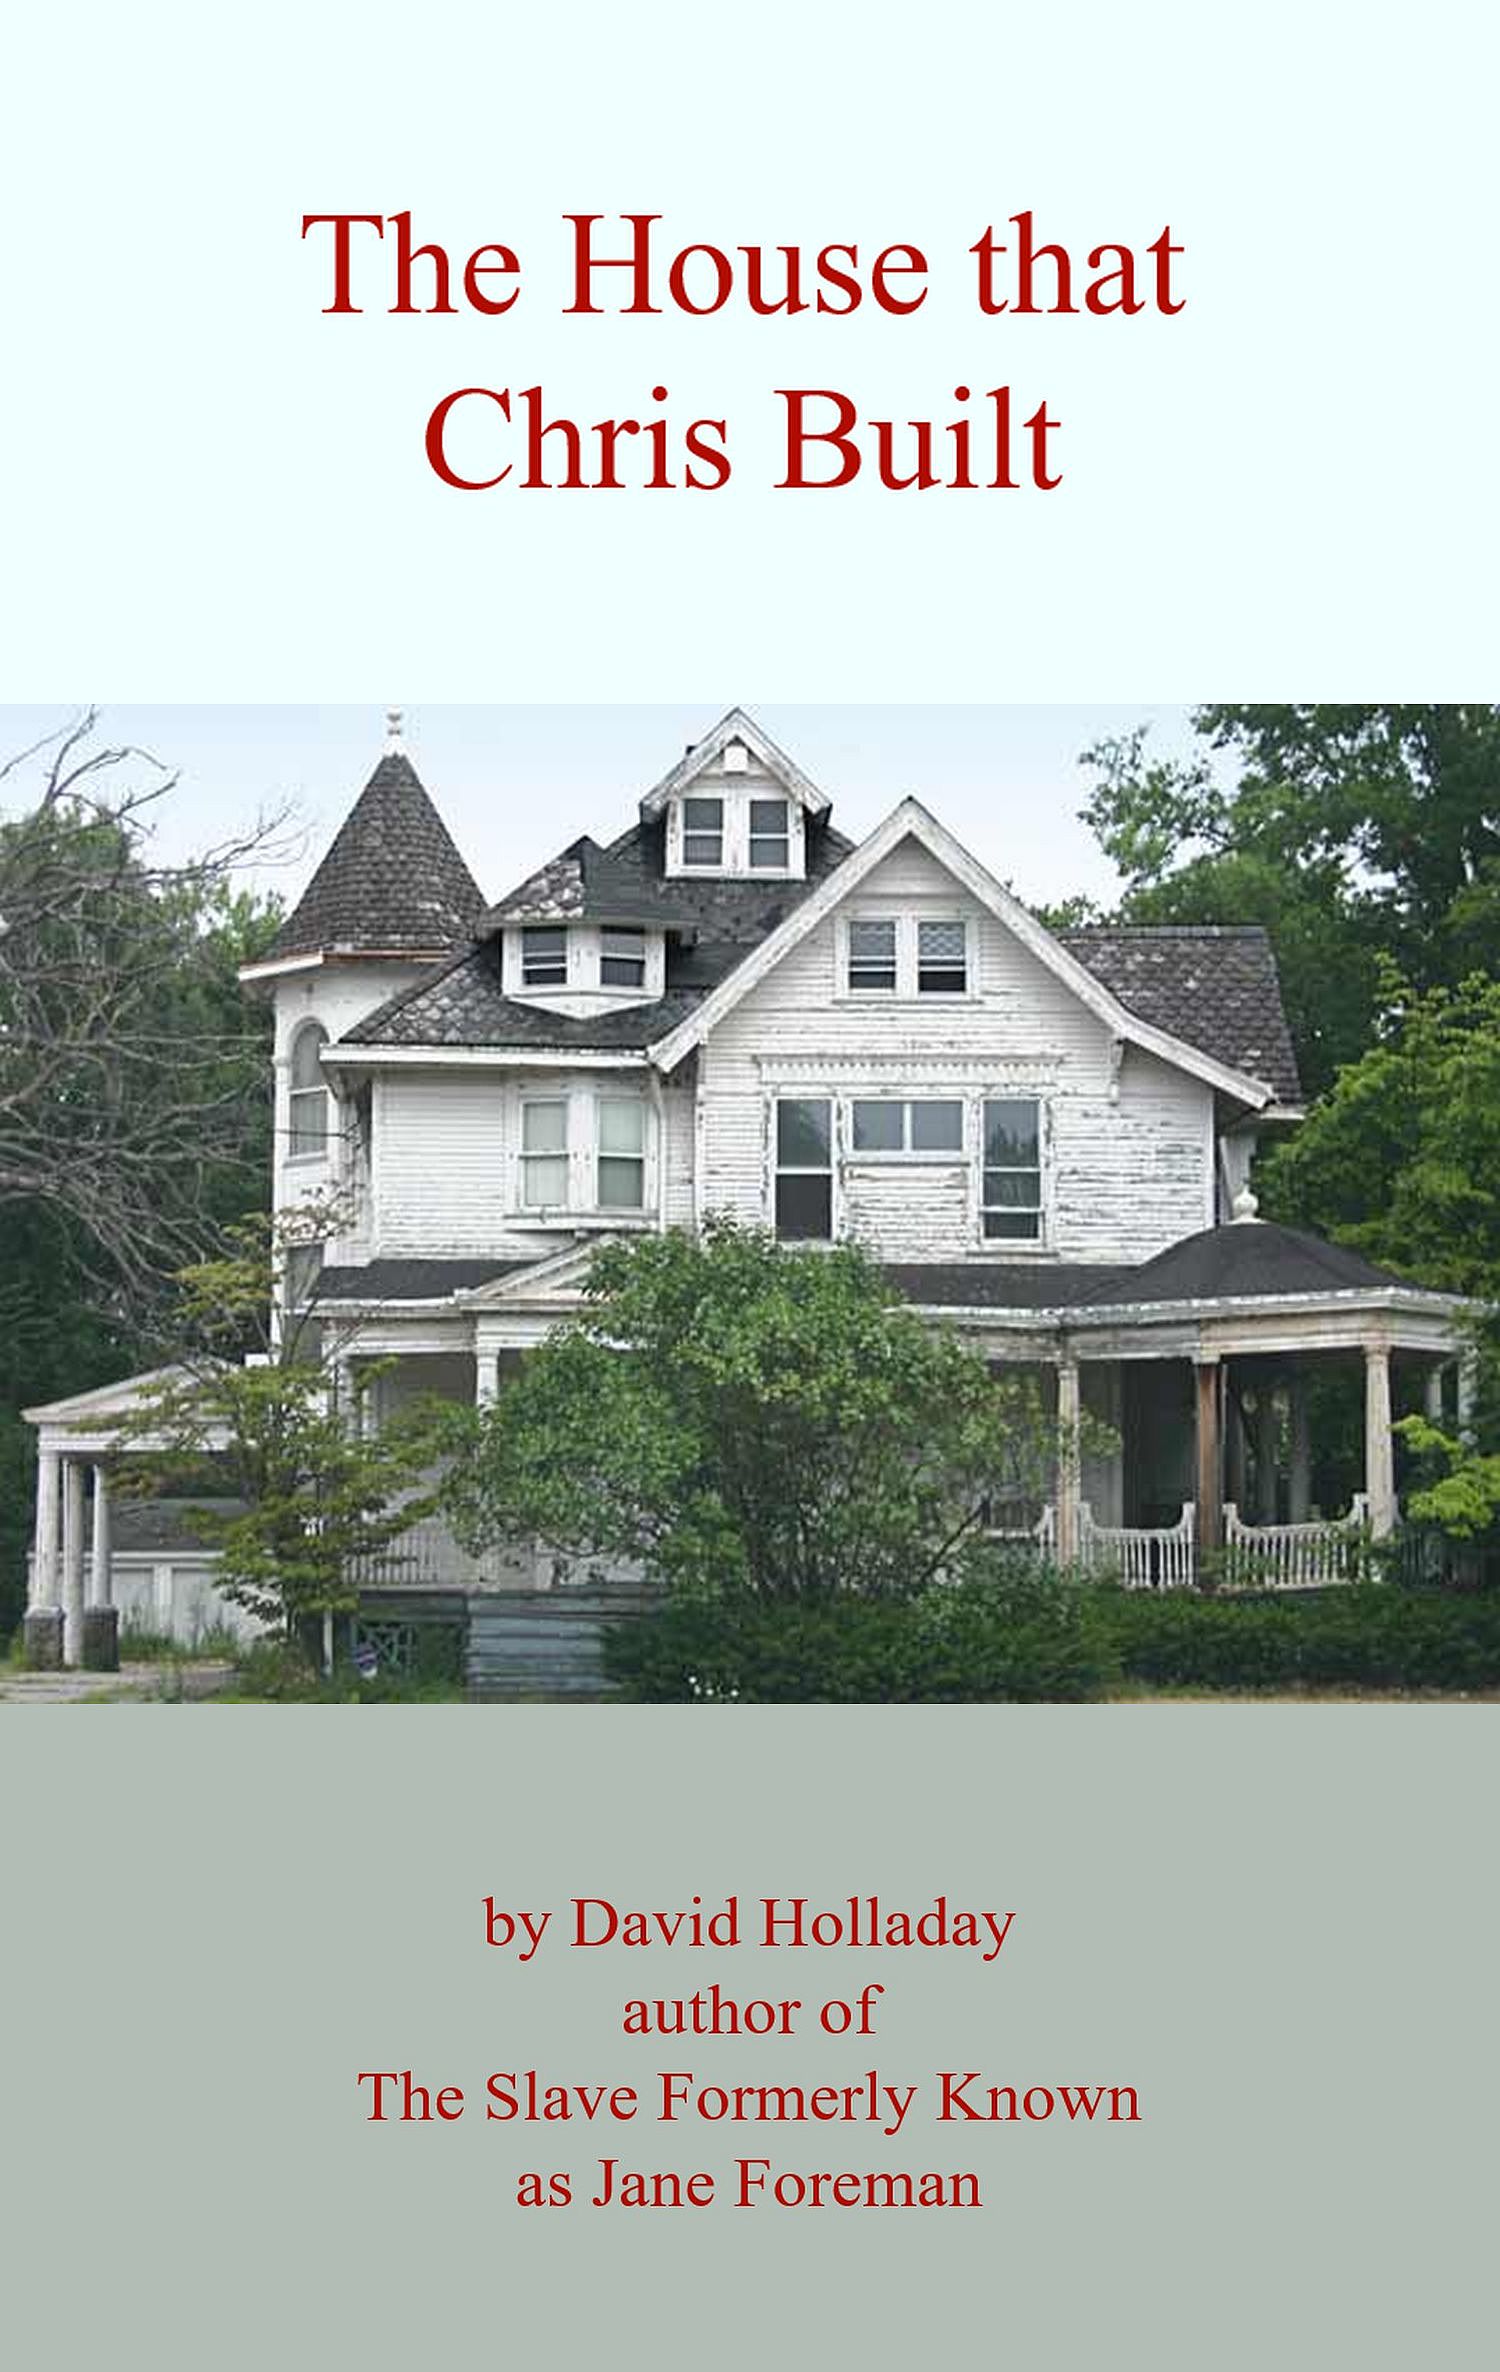 Book Cover image showing large, dilapidated house